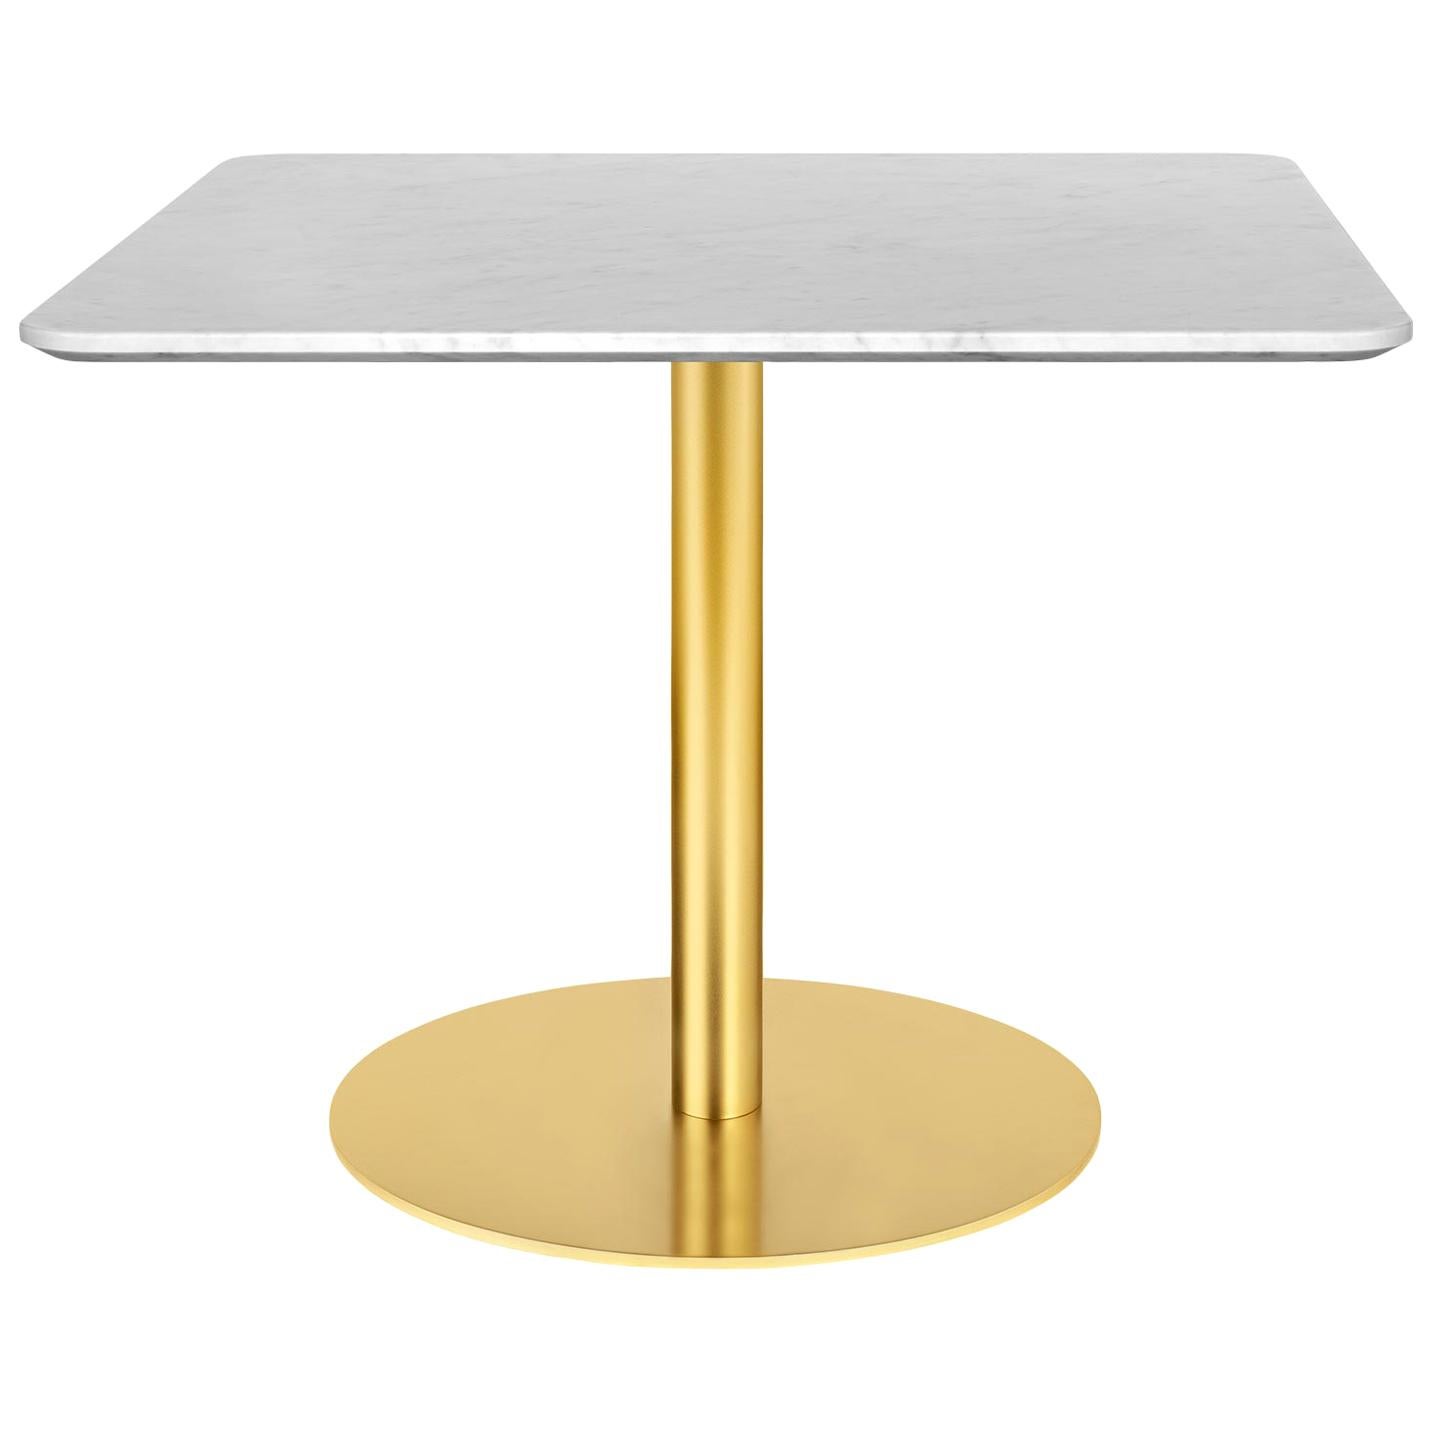 1.0 Lounge Table, Square, Round Brass Base, Large, Marble For Sale